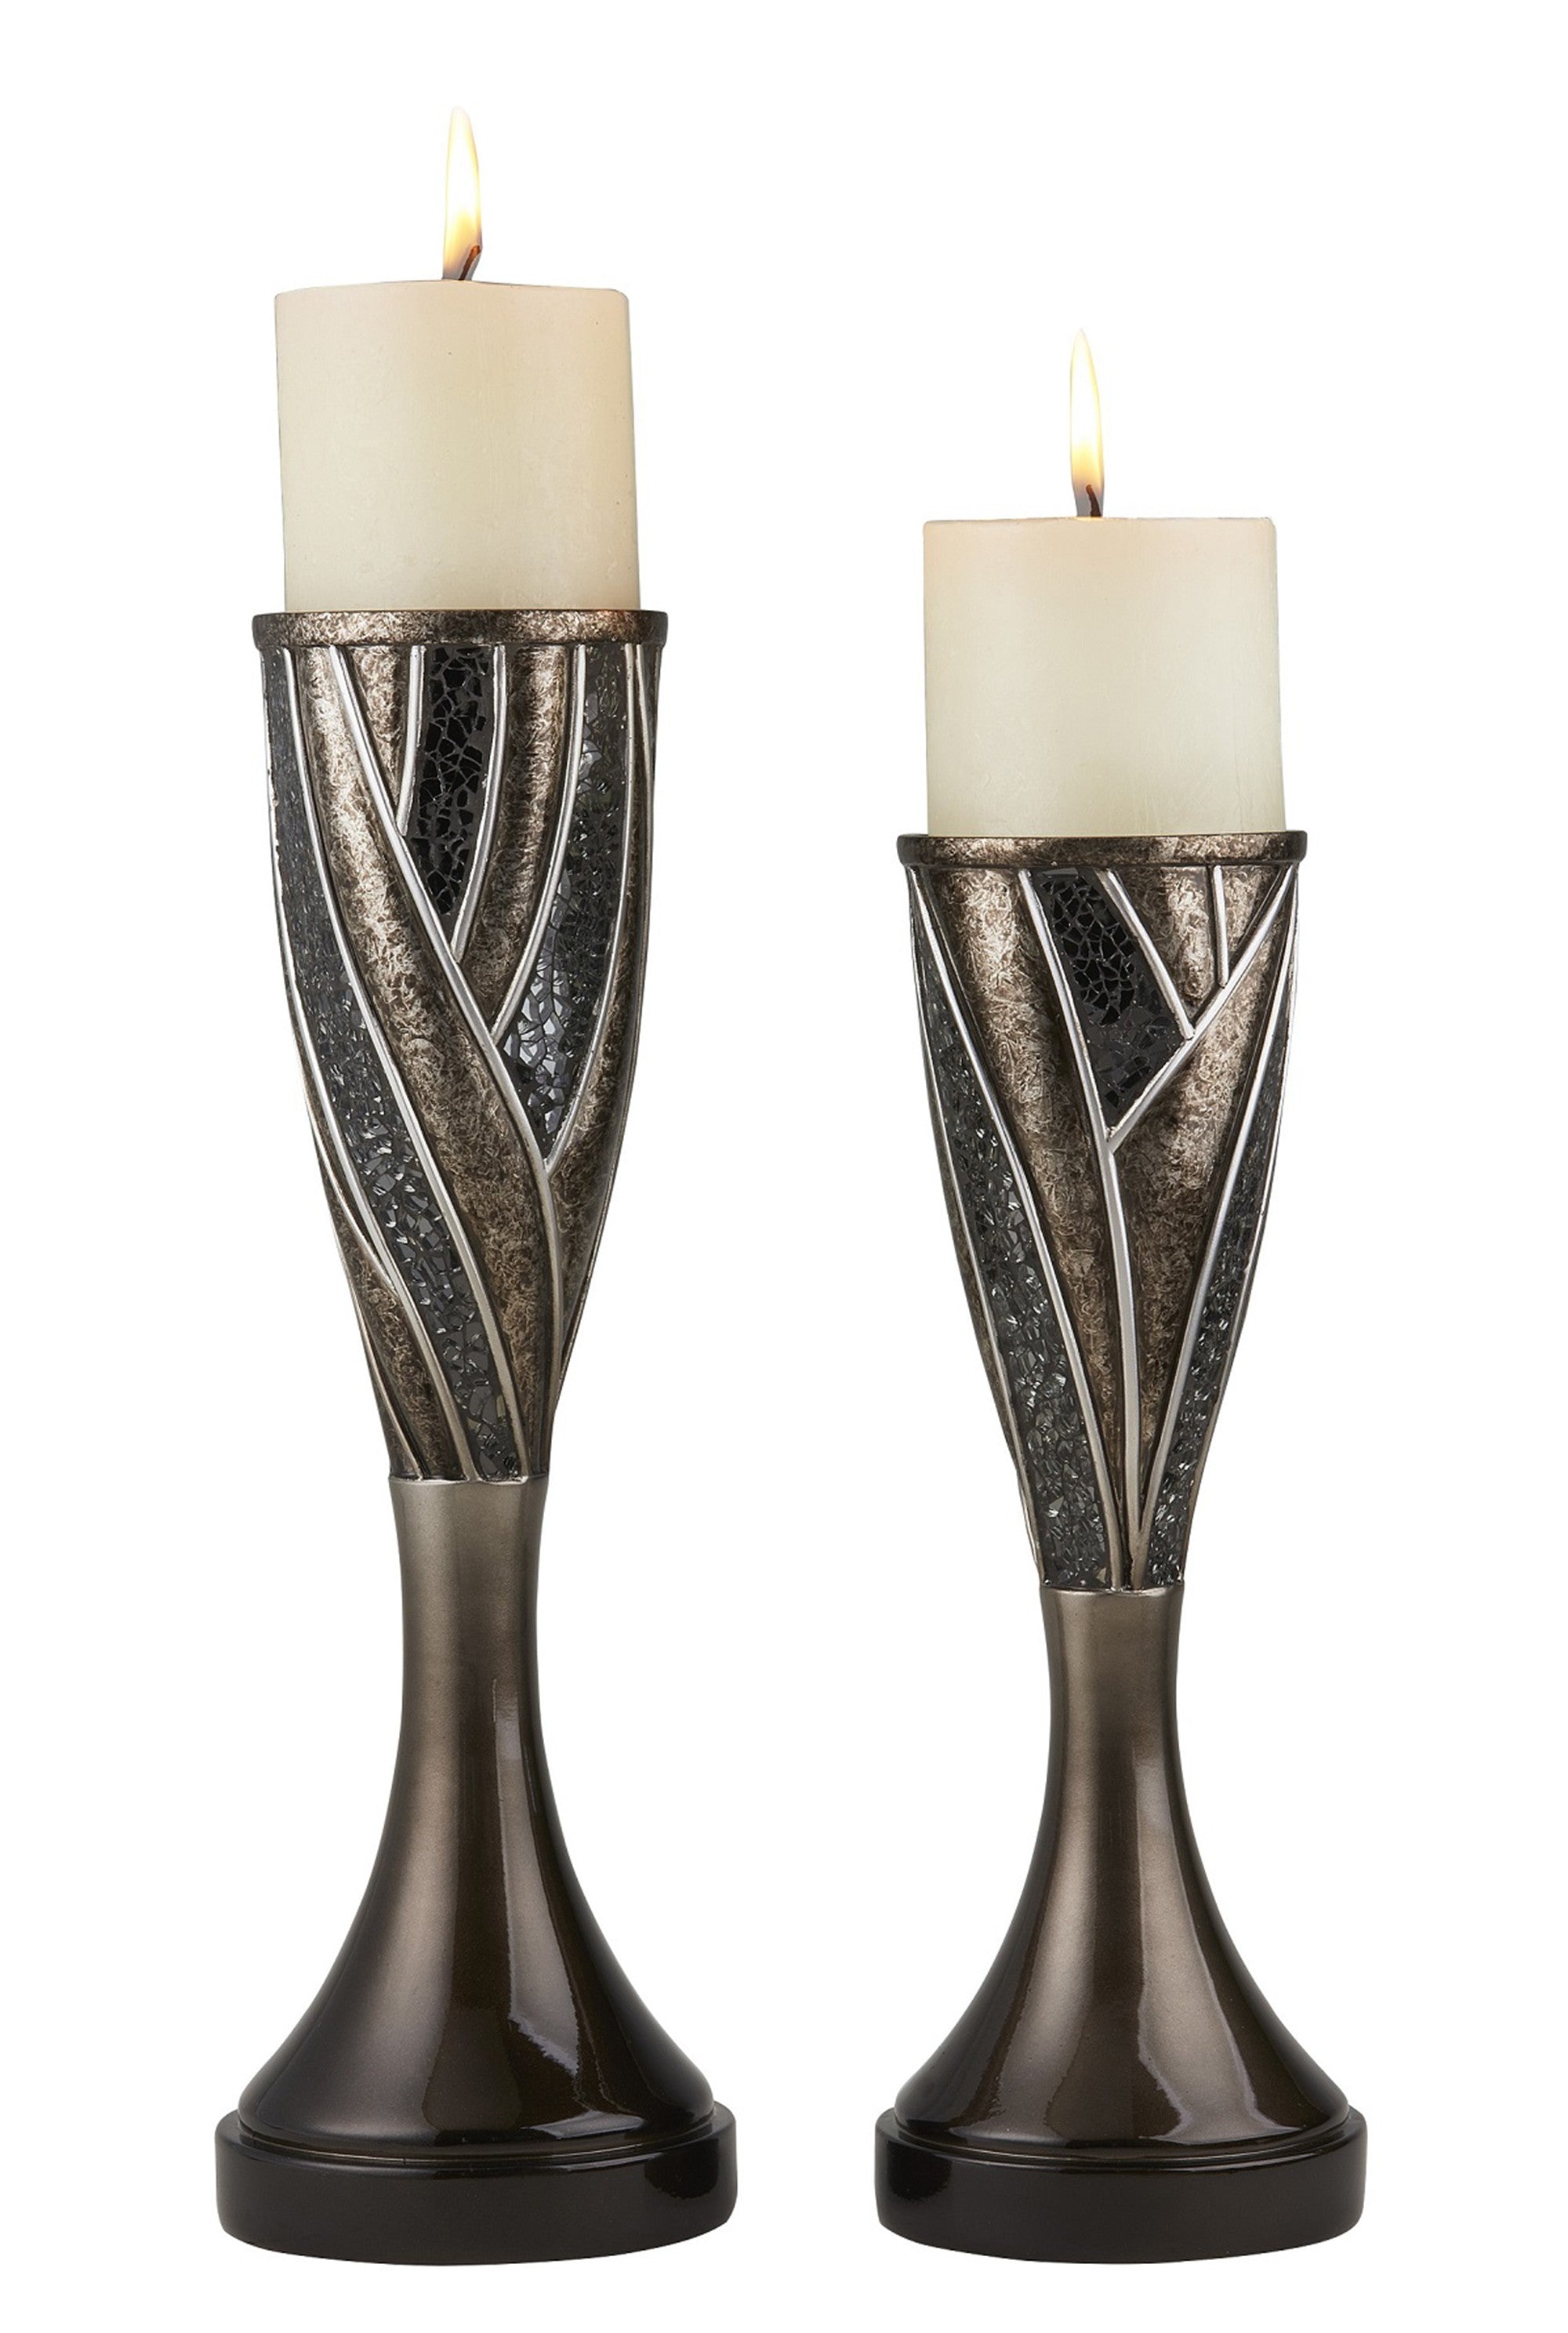 Set Of Two Brown and Bronze Pillar Tabletop Pillar Candle Holders